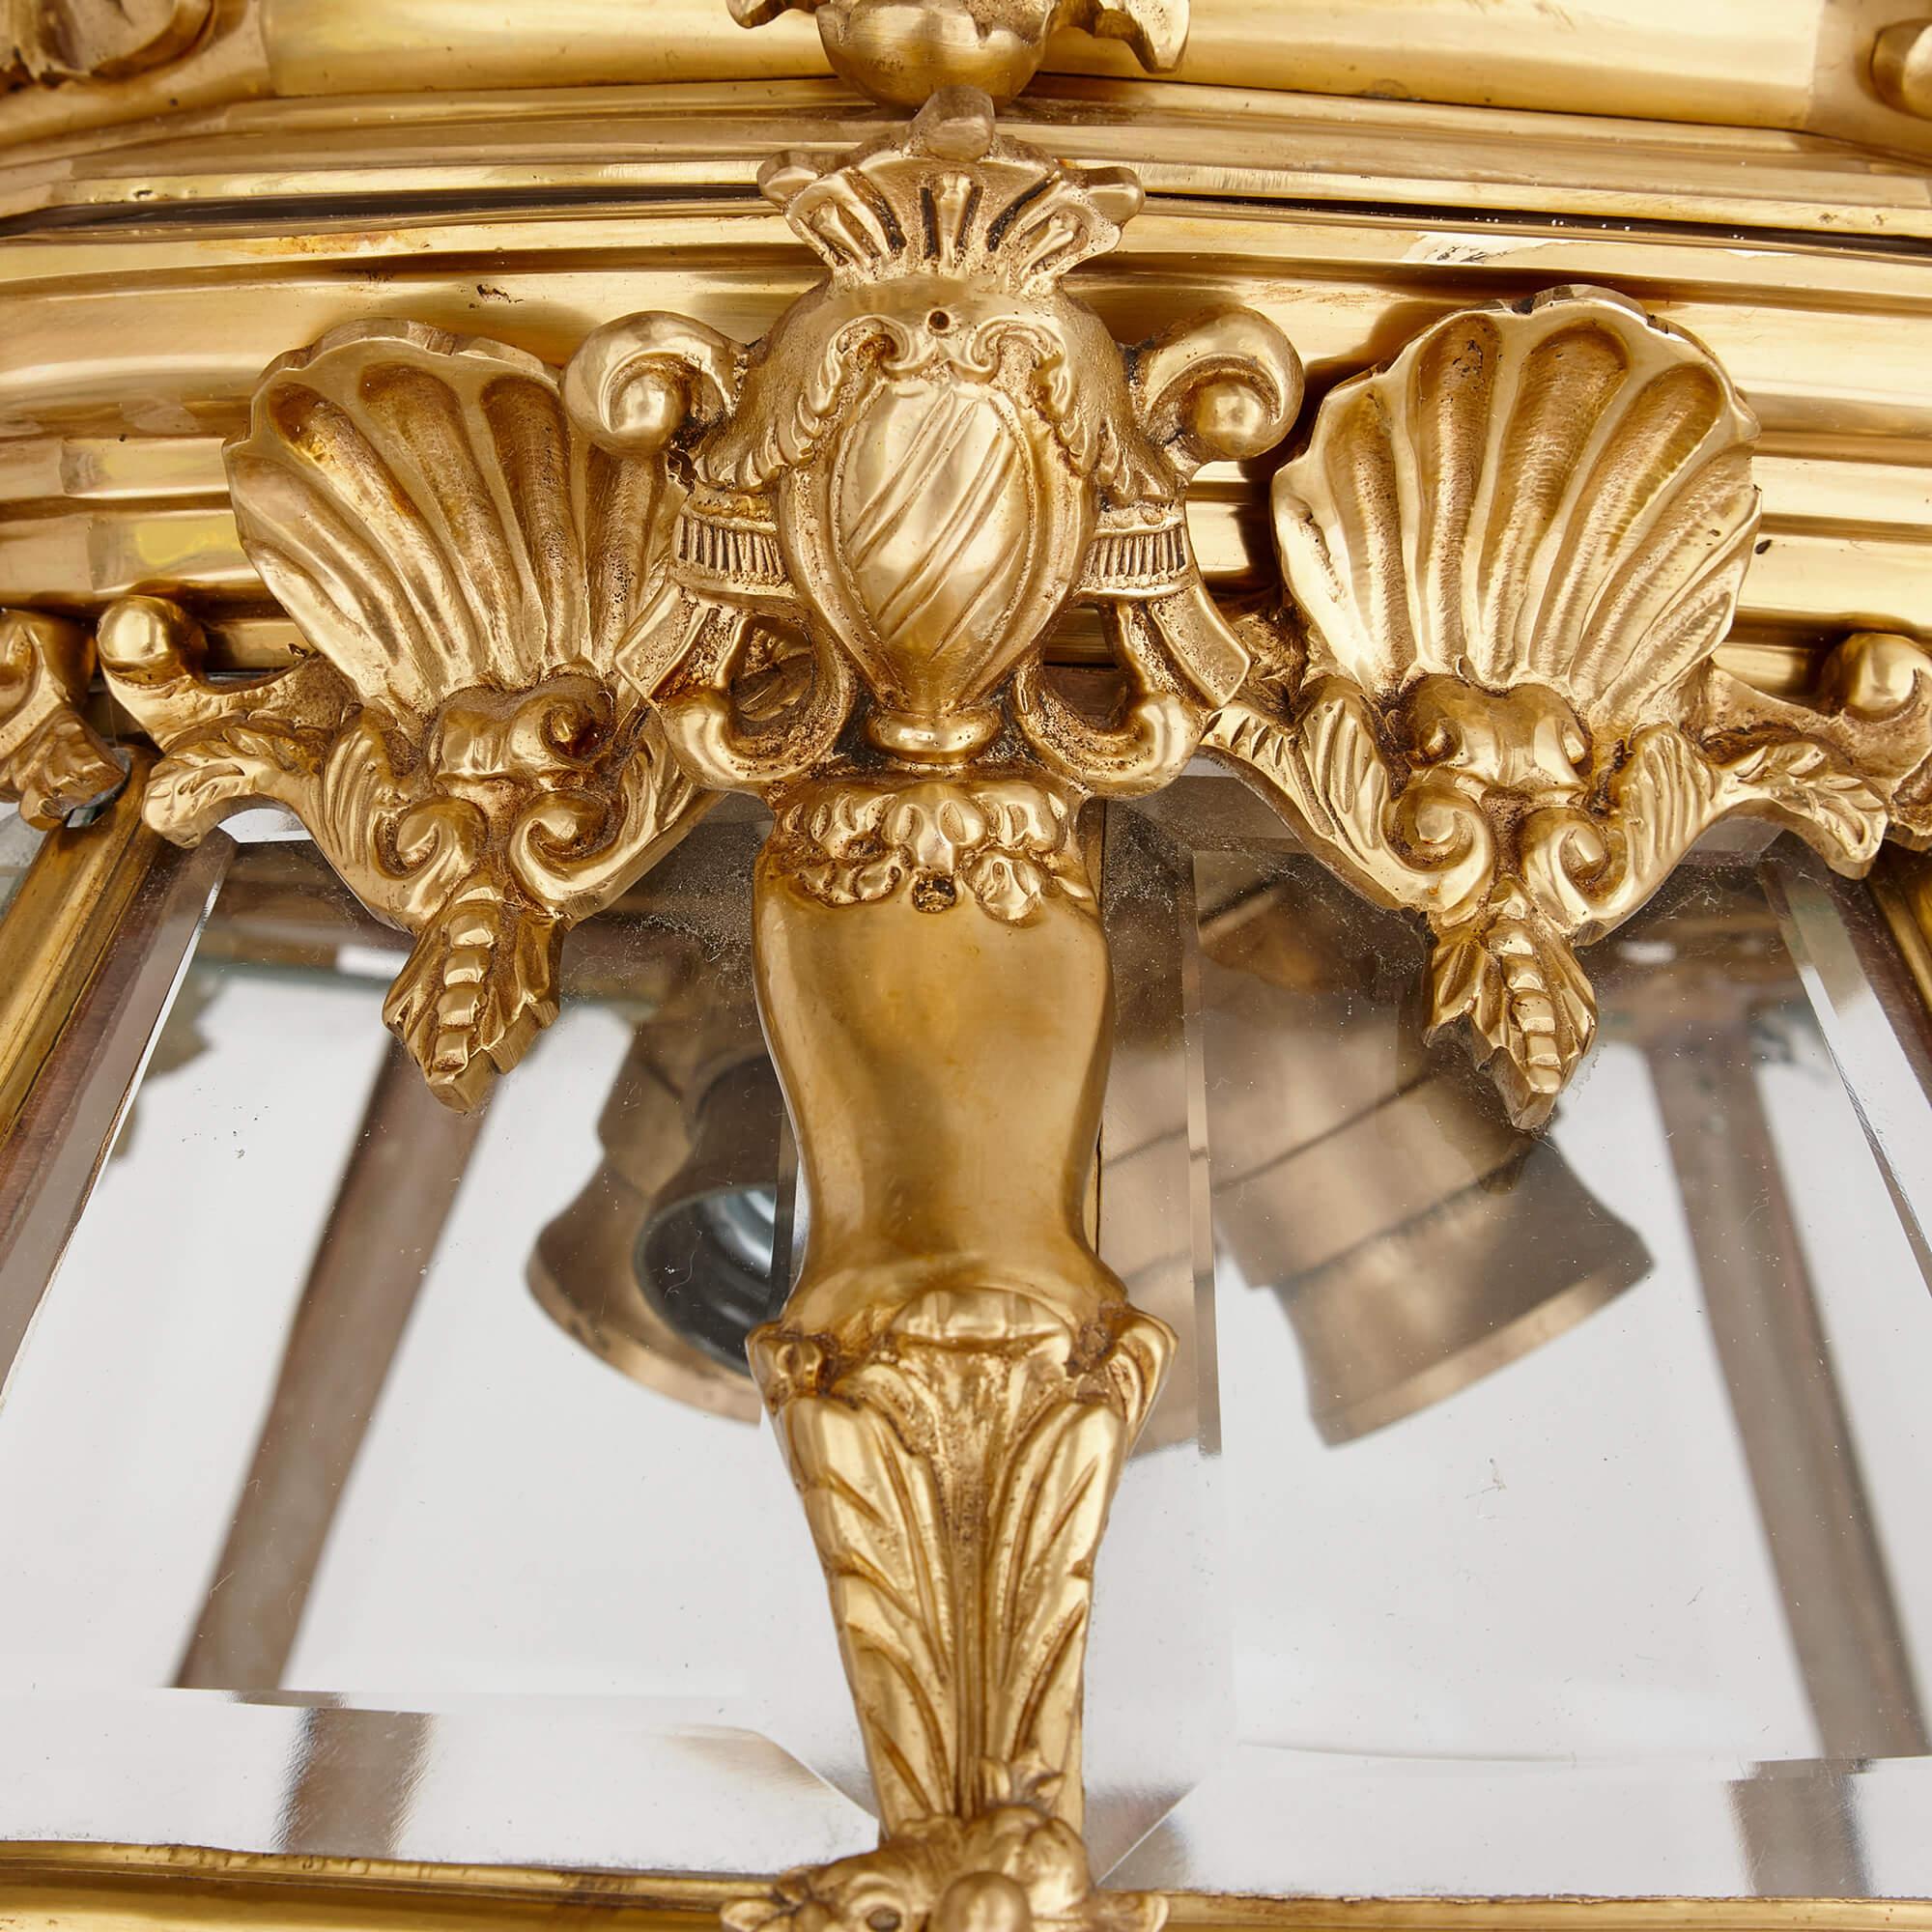 Large gilt bronze and glass ‘Versailles’ lantern
French, 20th Century 
Height 120cm, diameter 55cm

This magnificent lantern was made in France and its design is inspired by one made in the 18th century for the Palace of Versailles. 

Wrought from